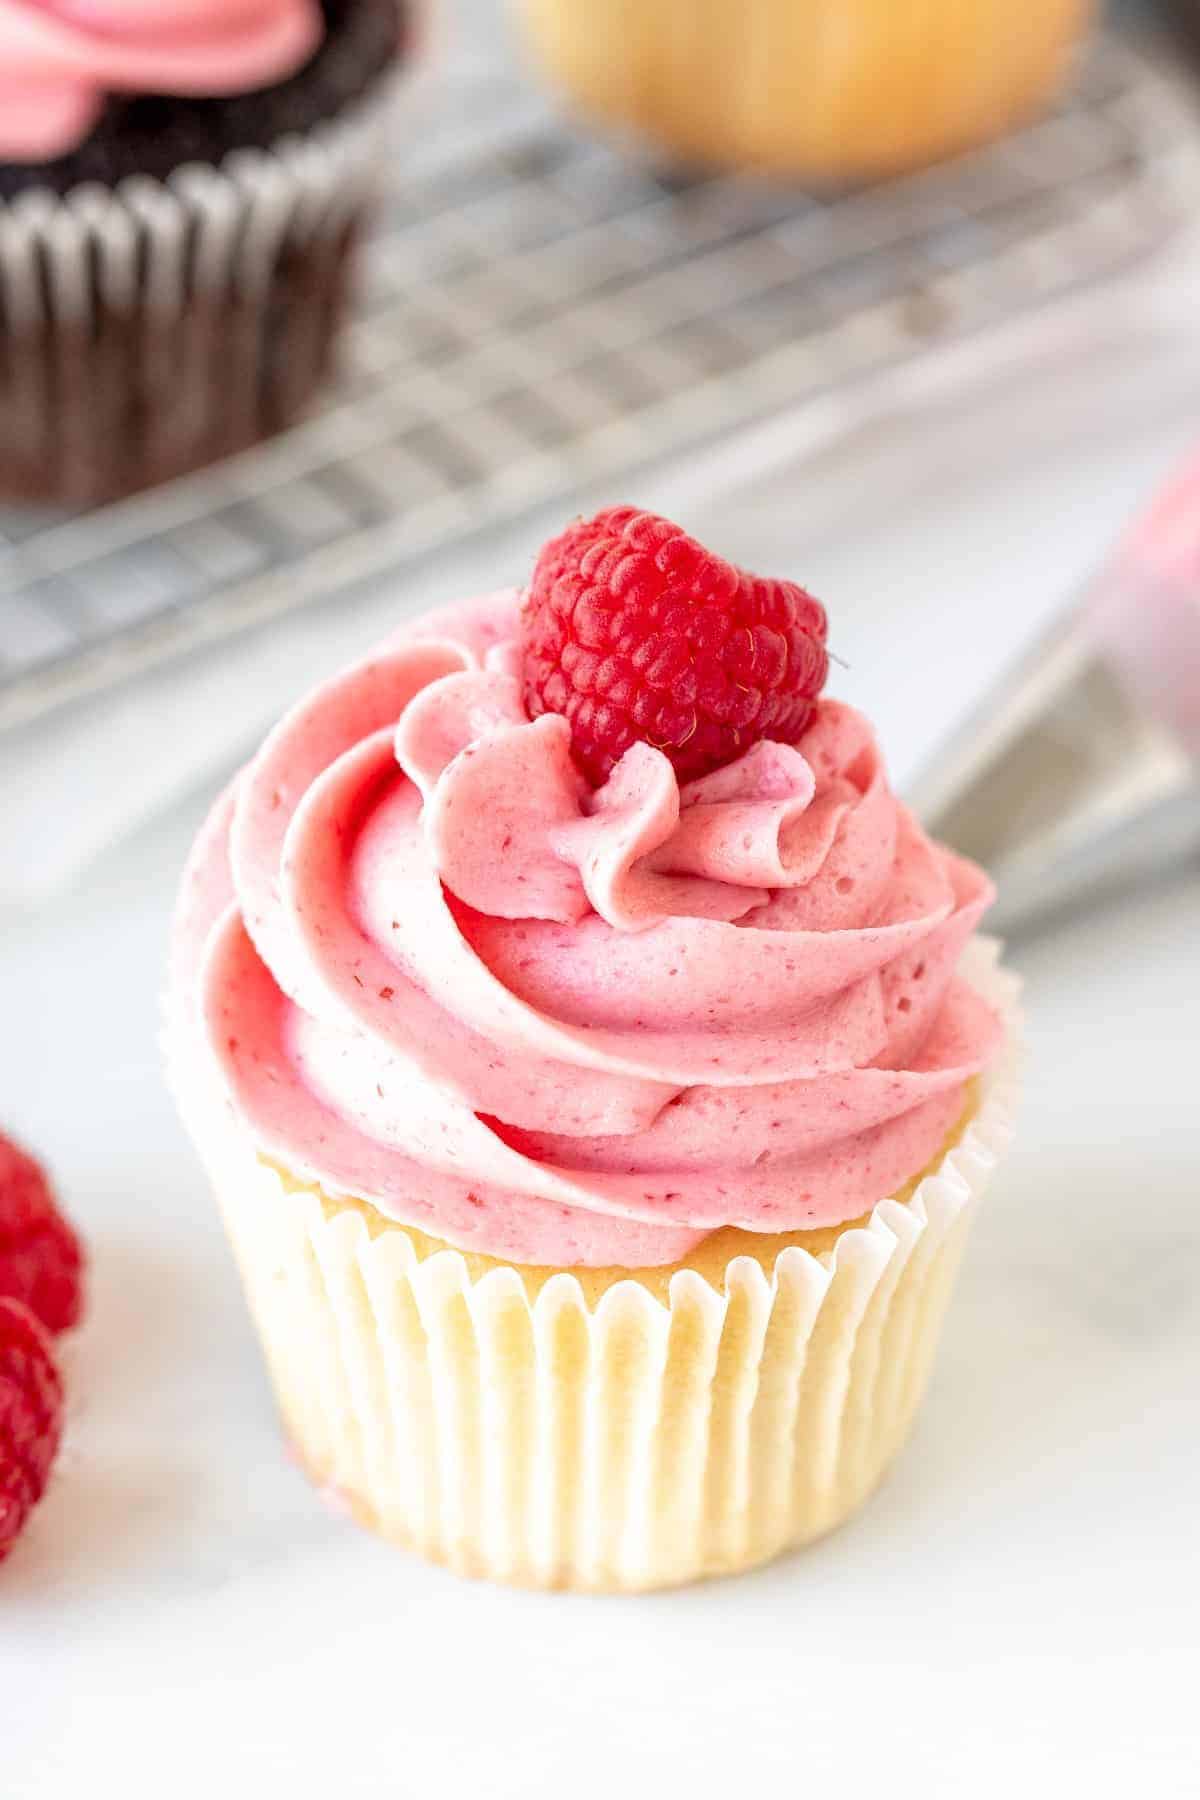 Raspberry Buttercream Frosting on a cupcake.